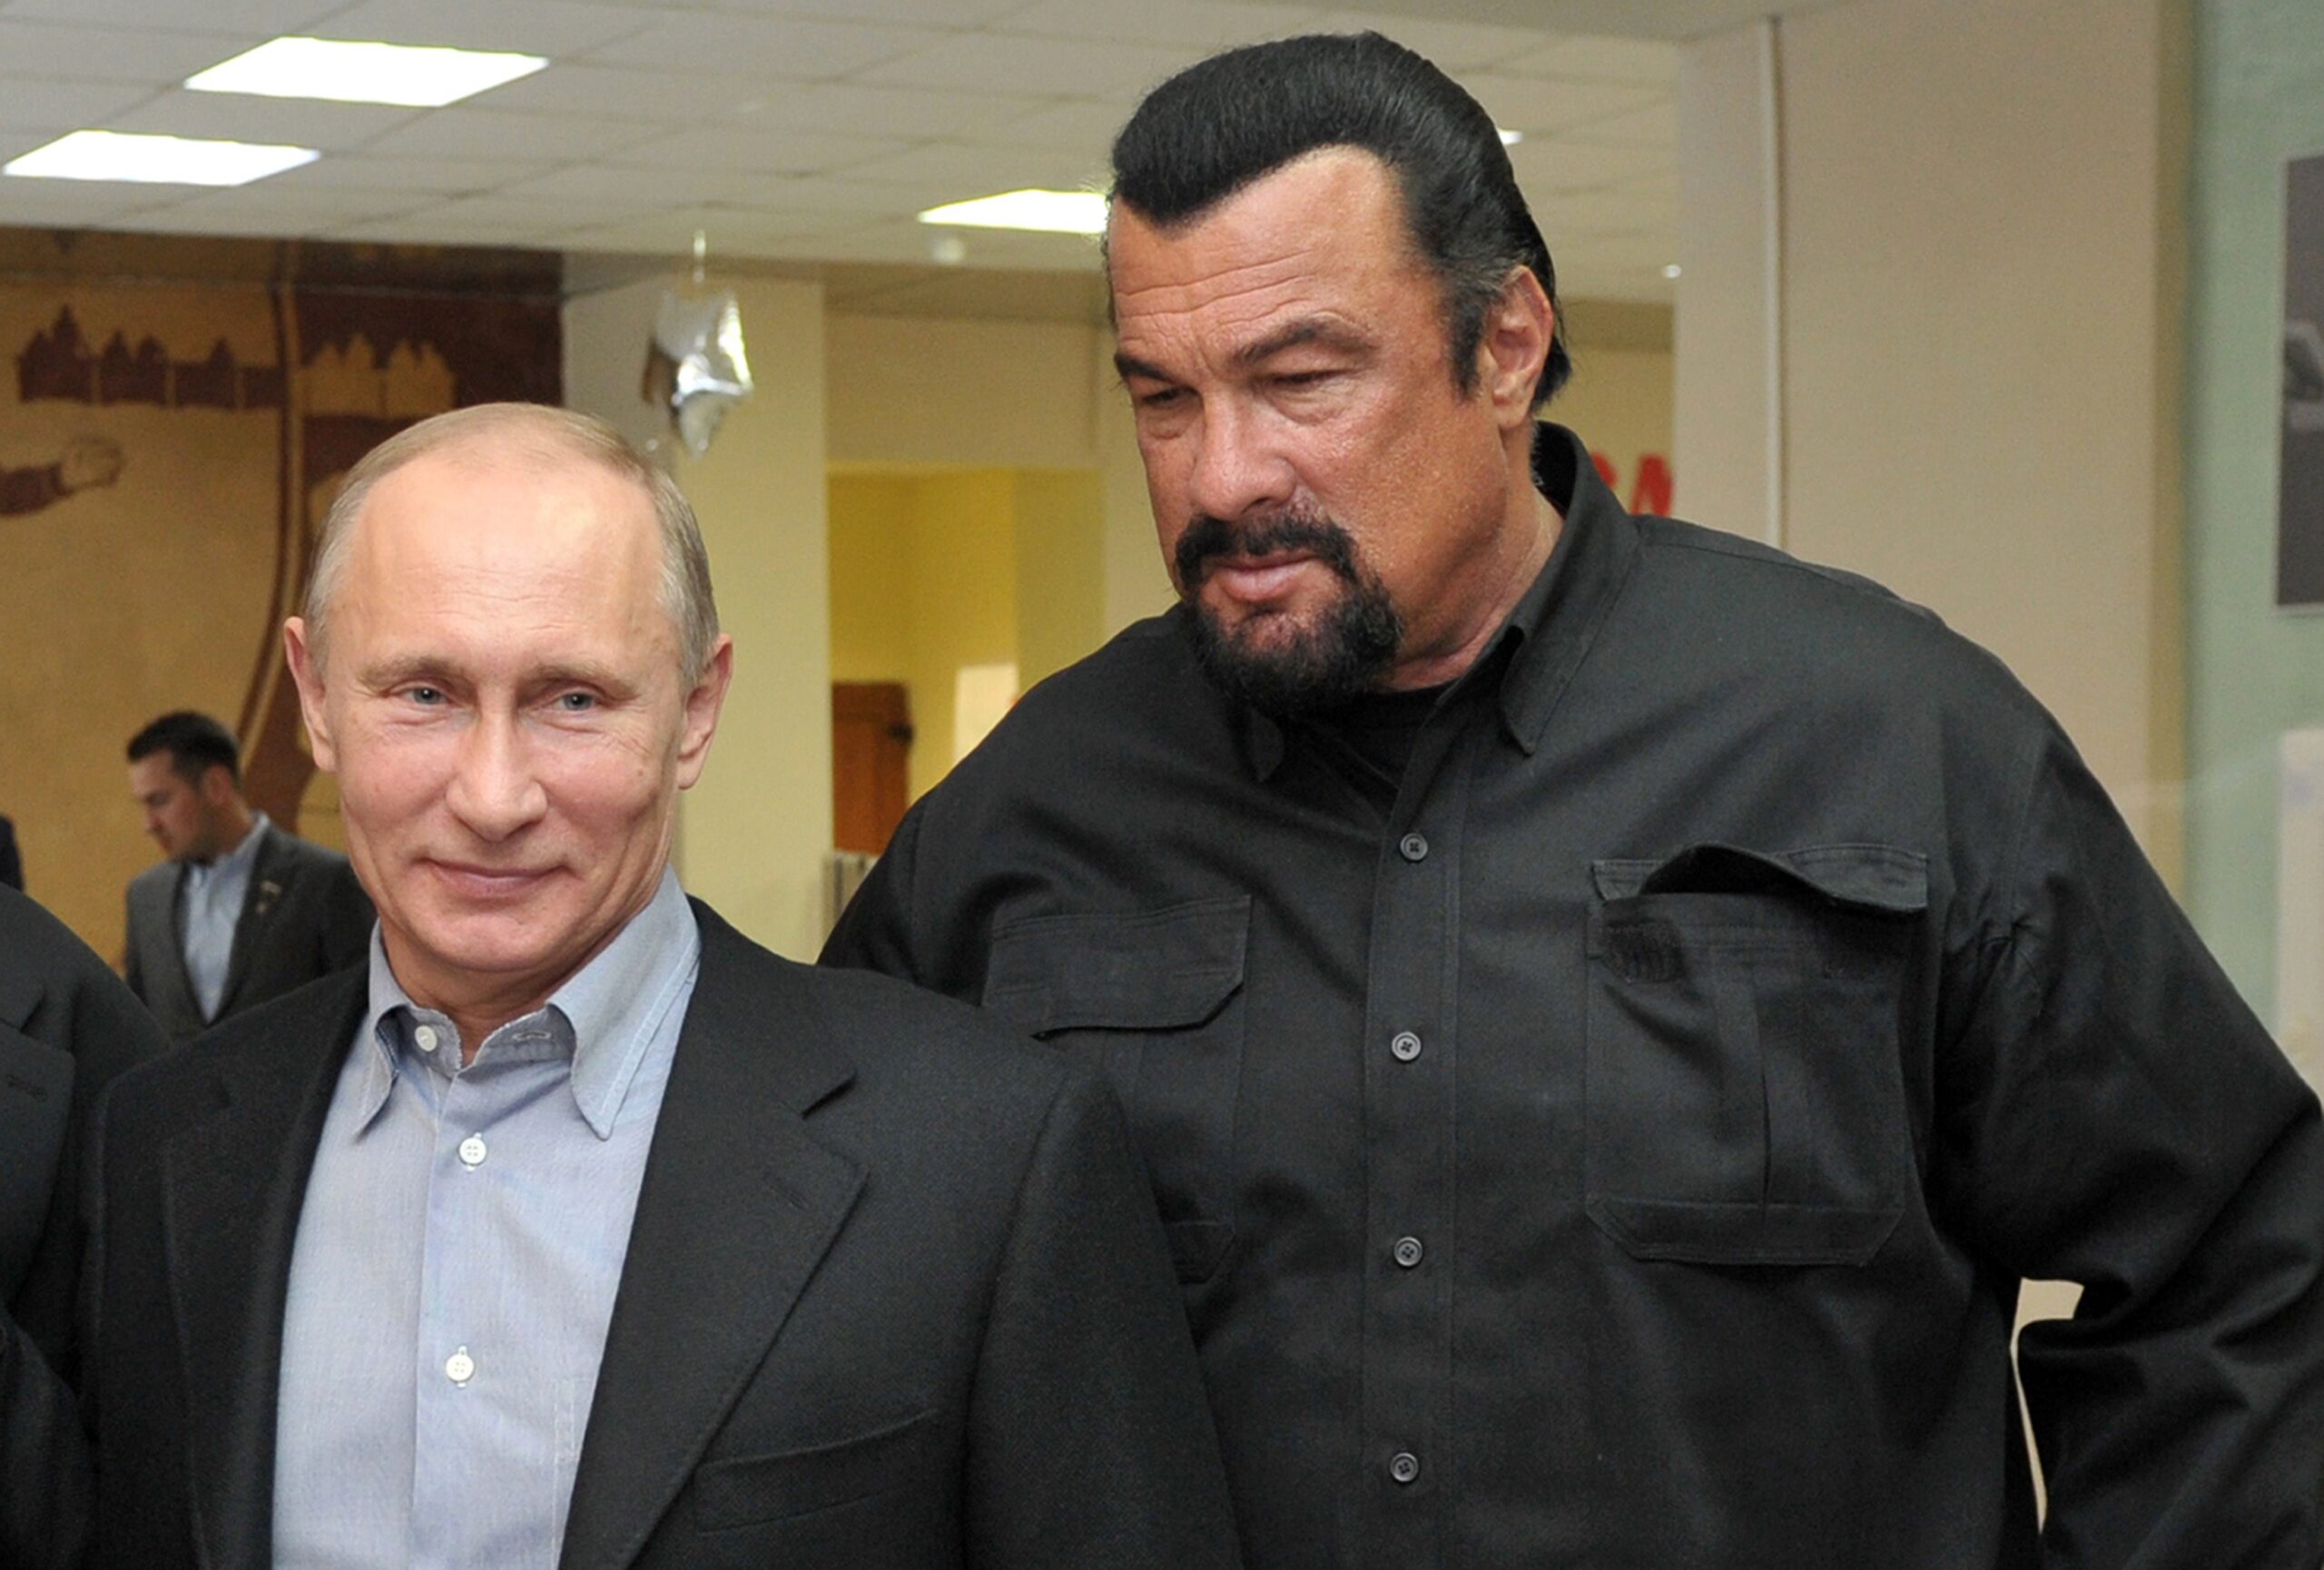 Seagal’s bond with Putin impacts his legacy in “On Deadly Ground.”